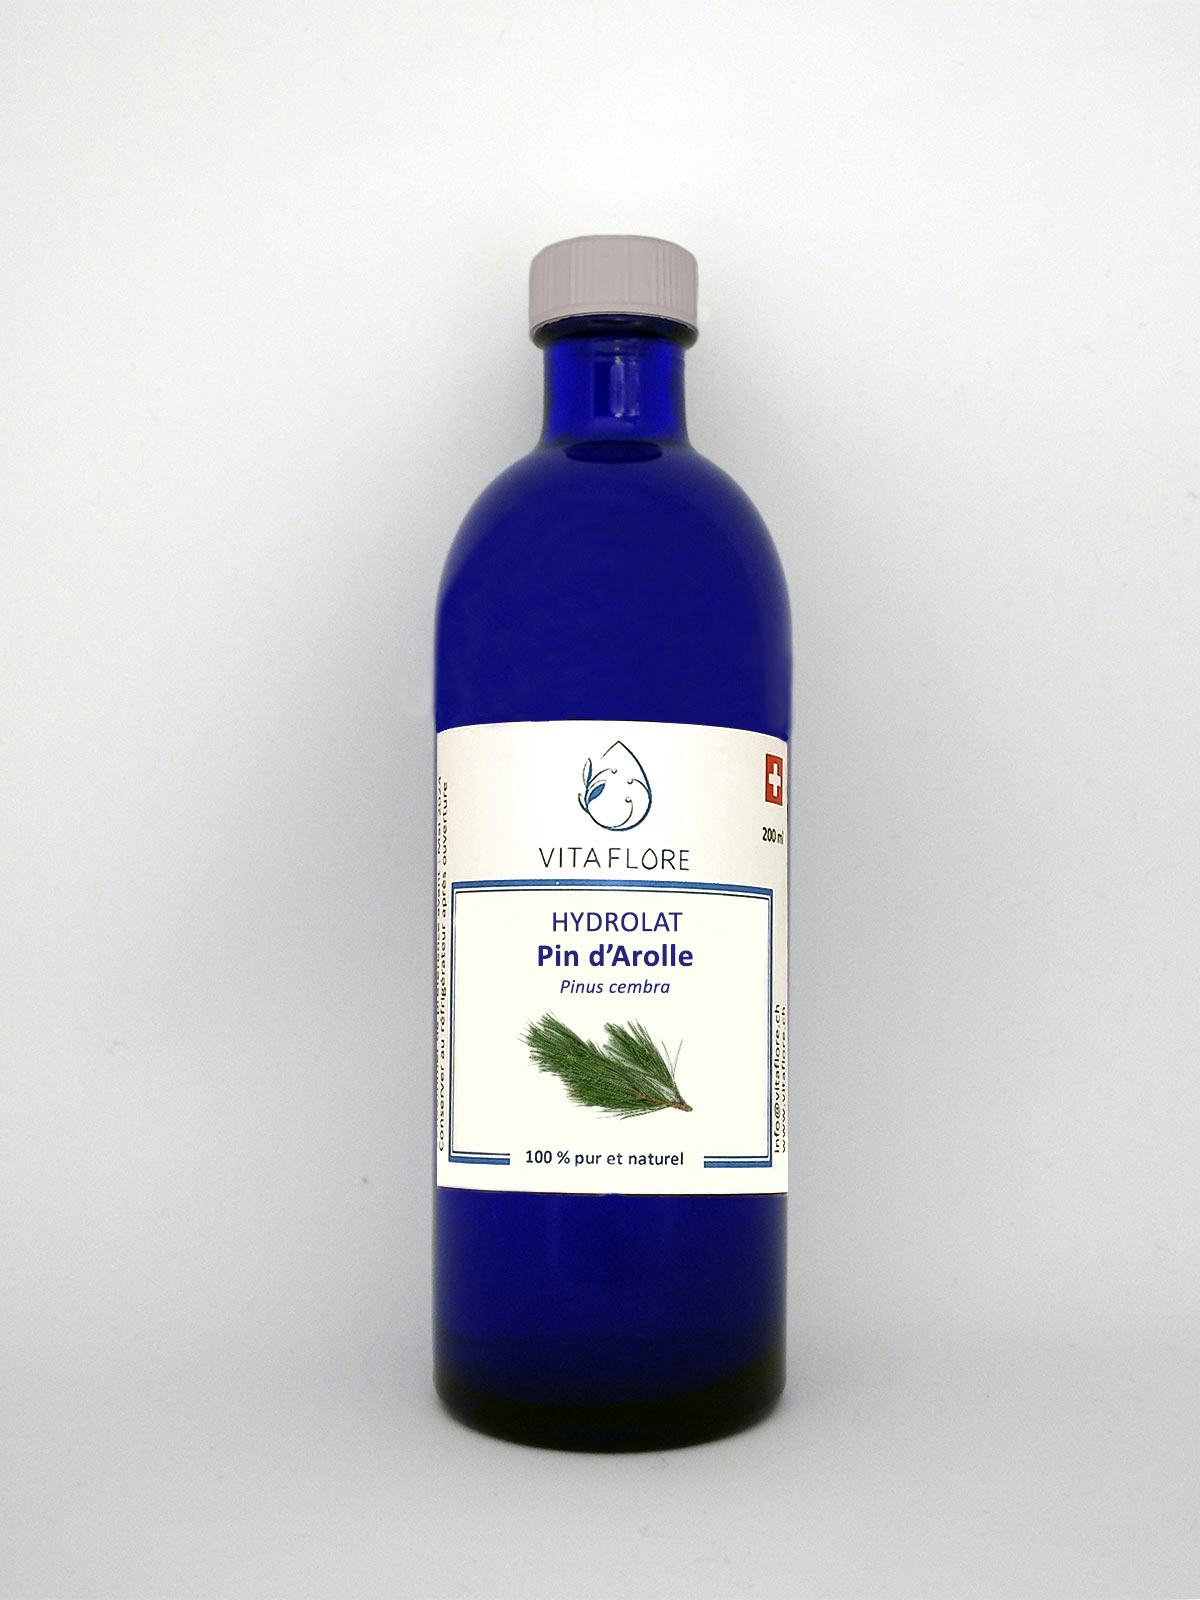 Arolle Pine Hydrosol, artisanal product for direct sale in Switzerland